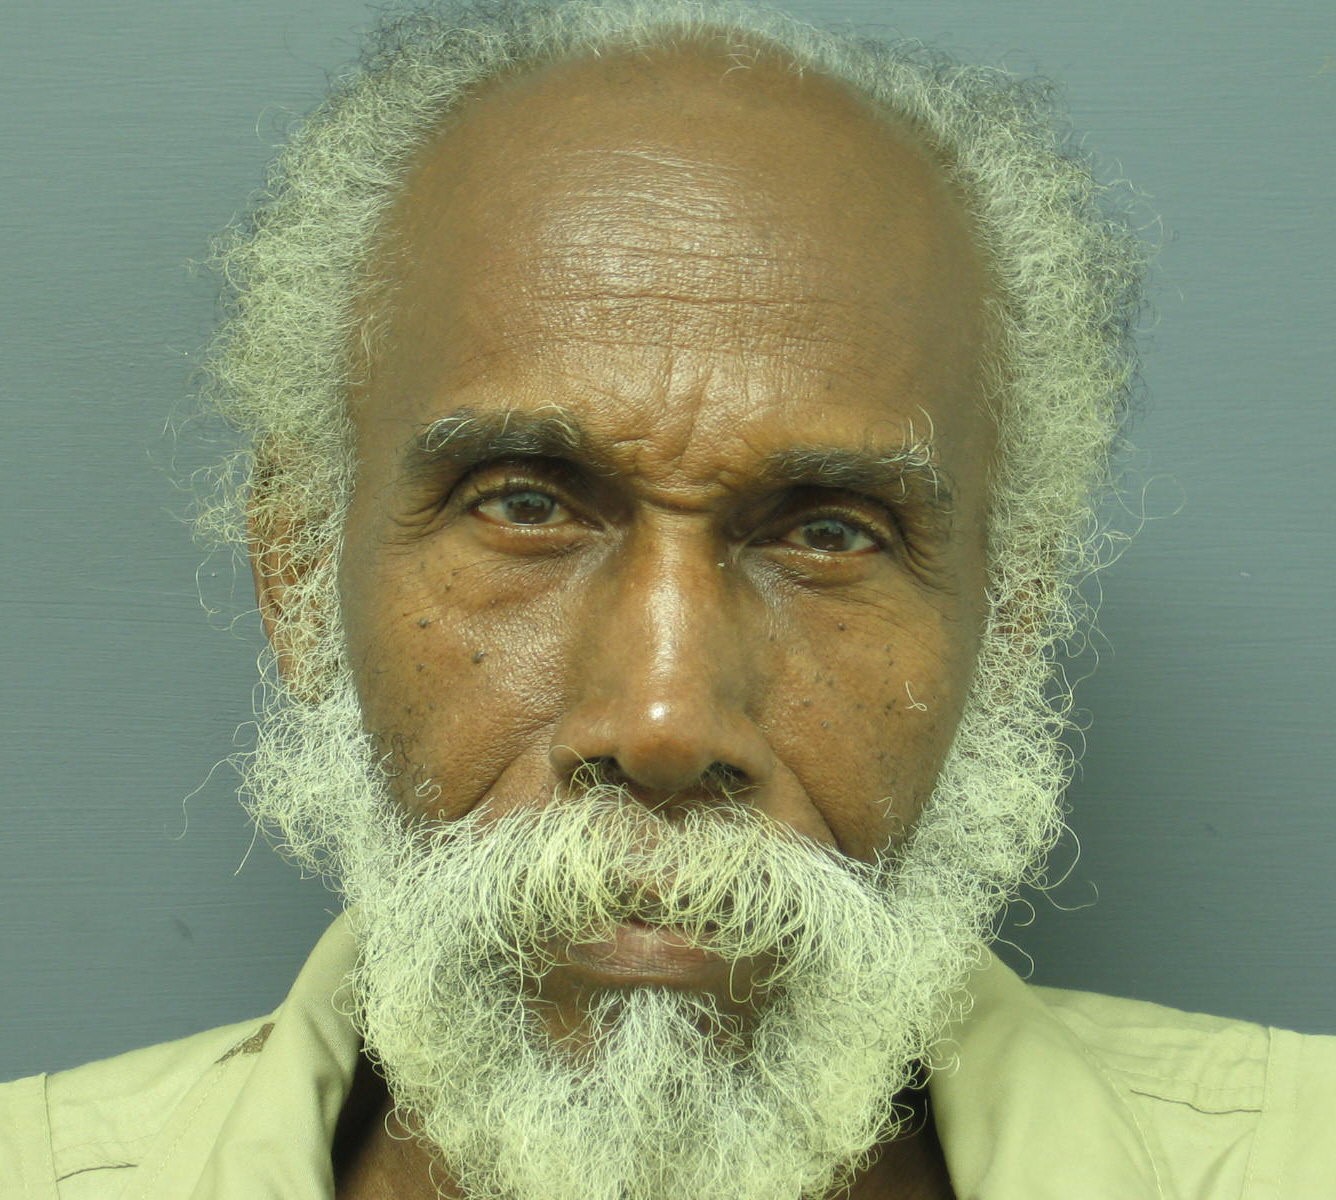 Police Looking For 76-Year-Old Man Who Has Been Missing On St. Thomas For 1 Year